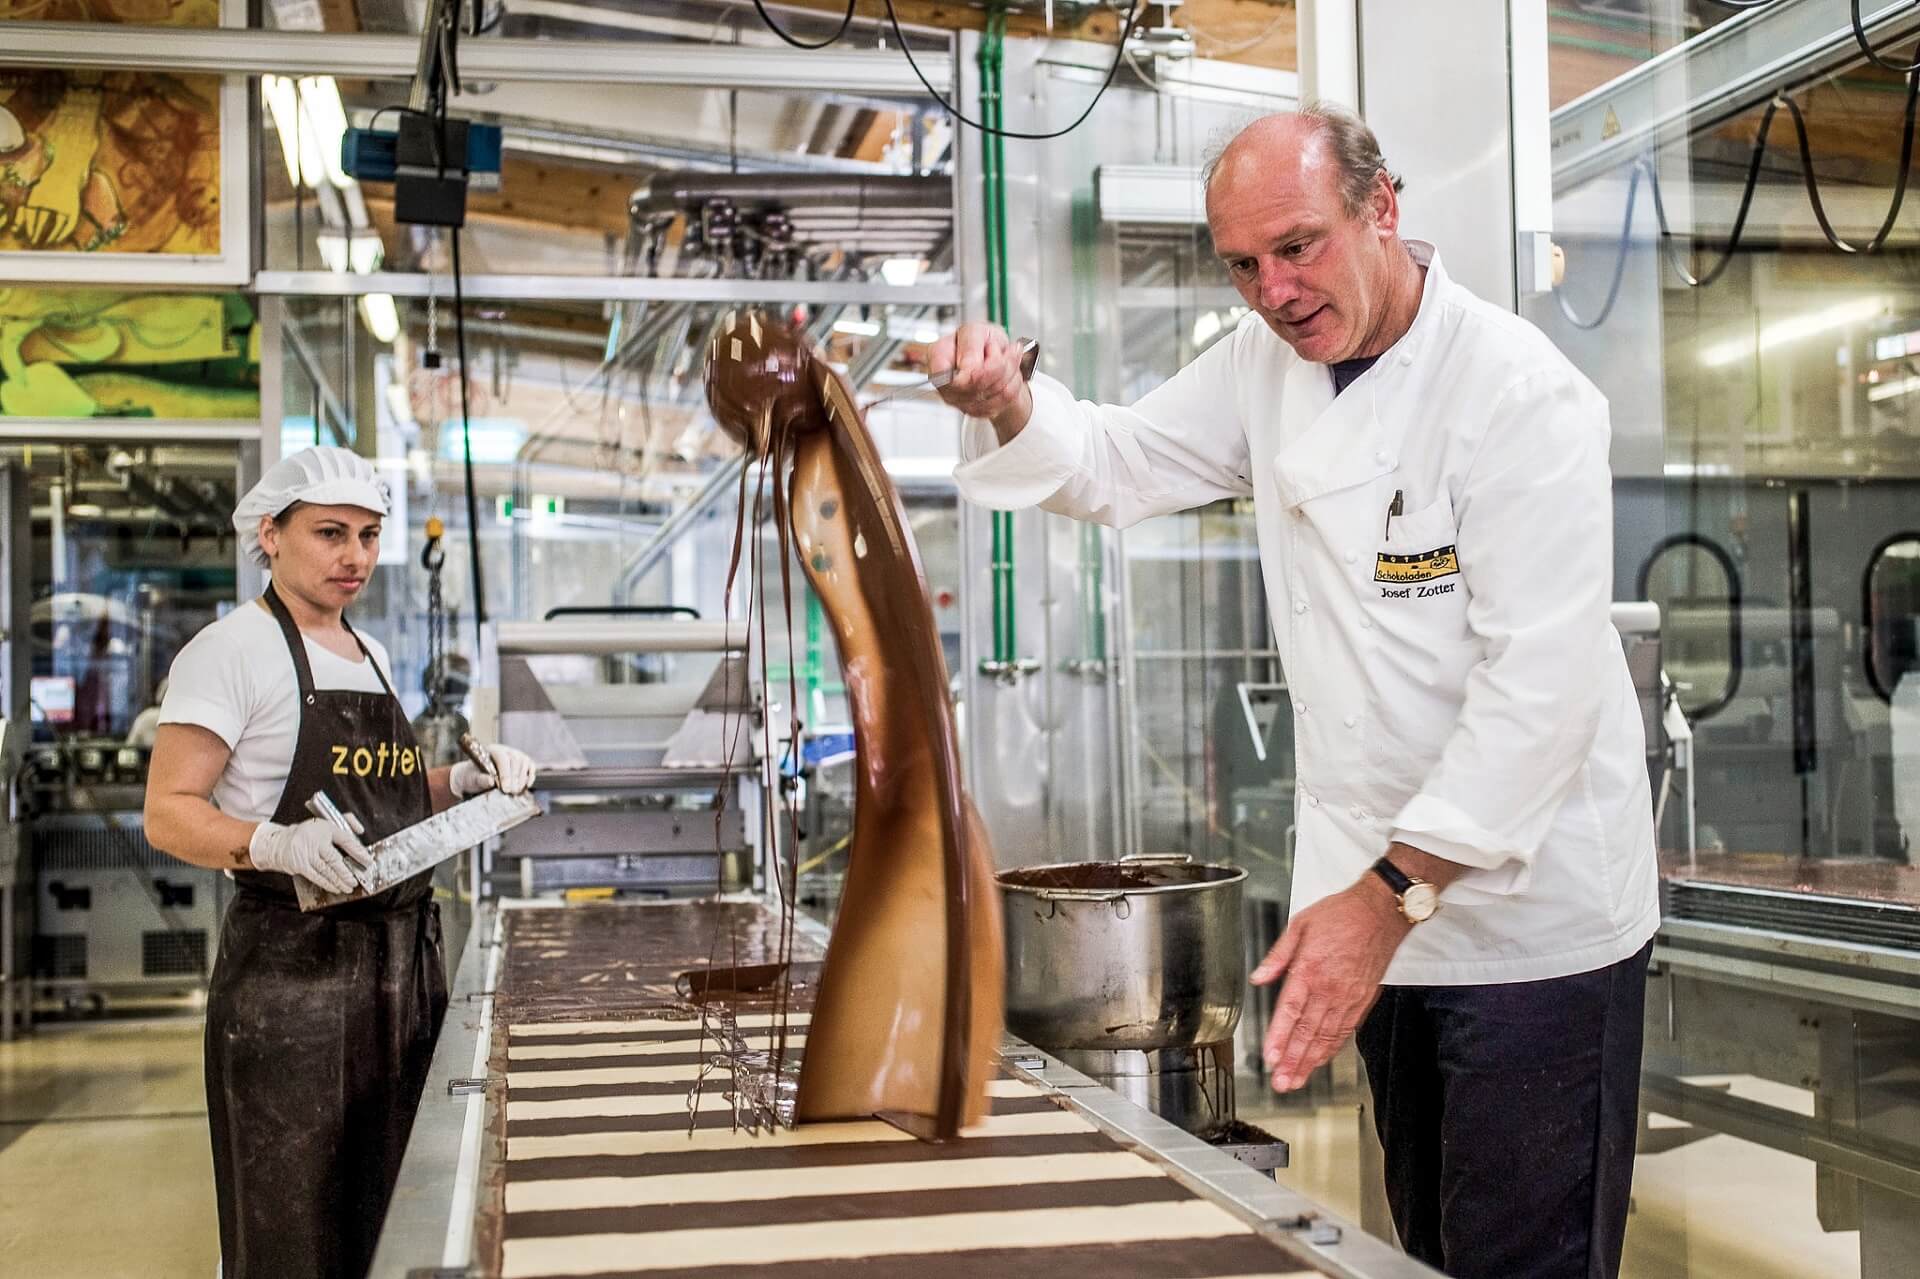 Star chocolatier Josef Zotter sources his vanilla directly from small vanilla farmers in Madagascar.